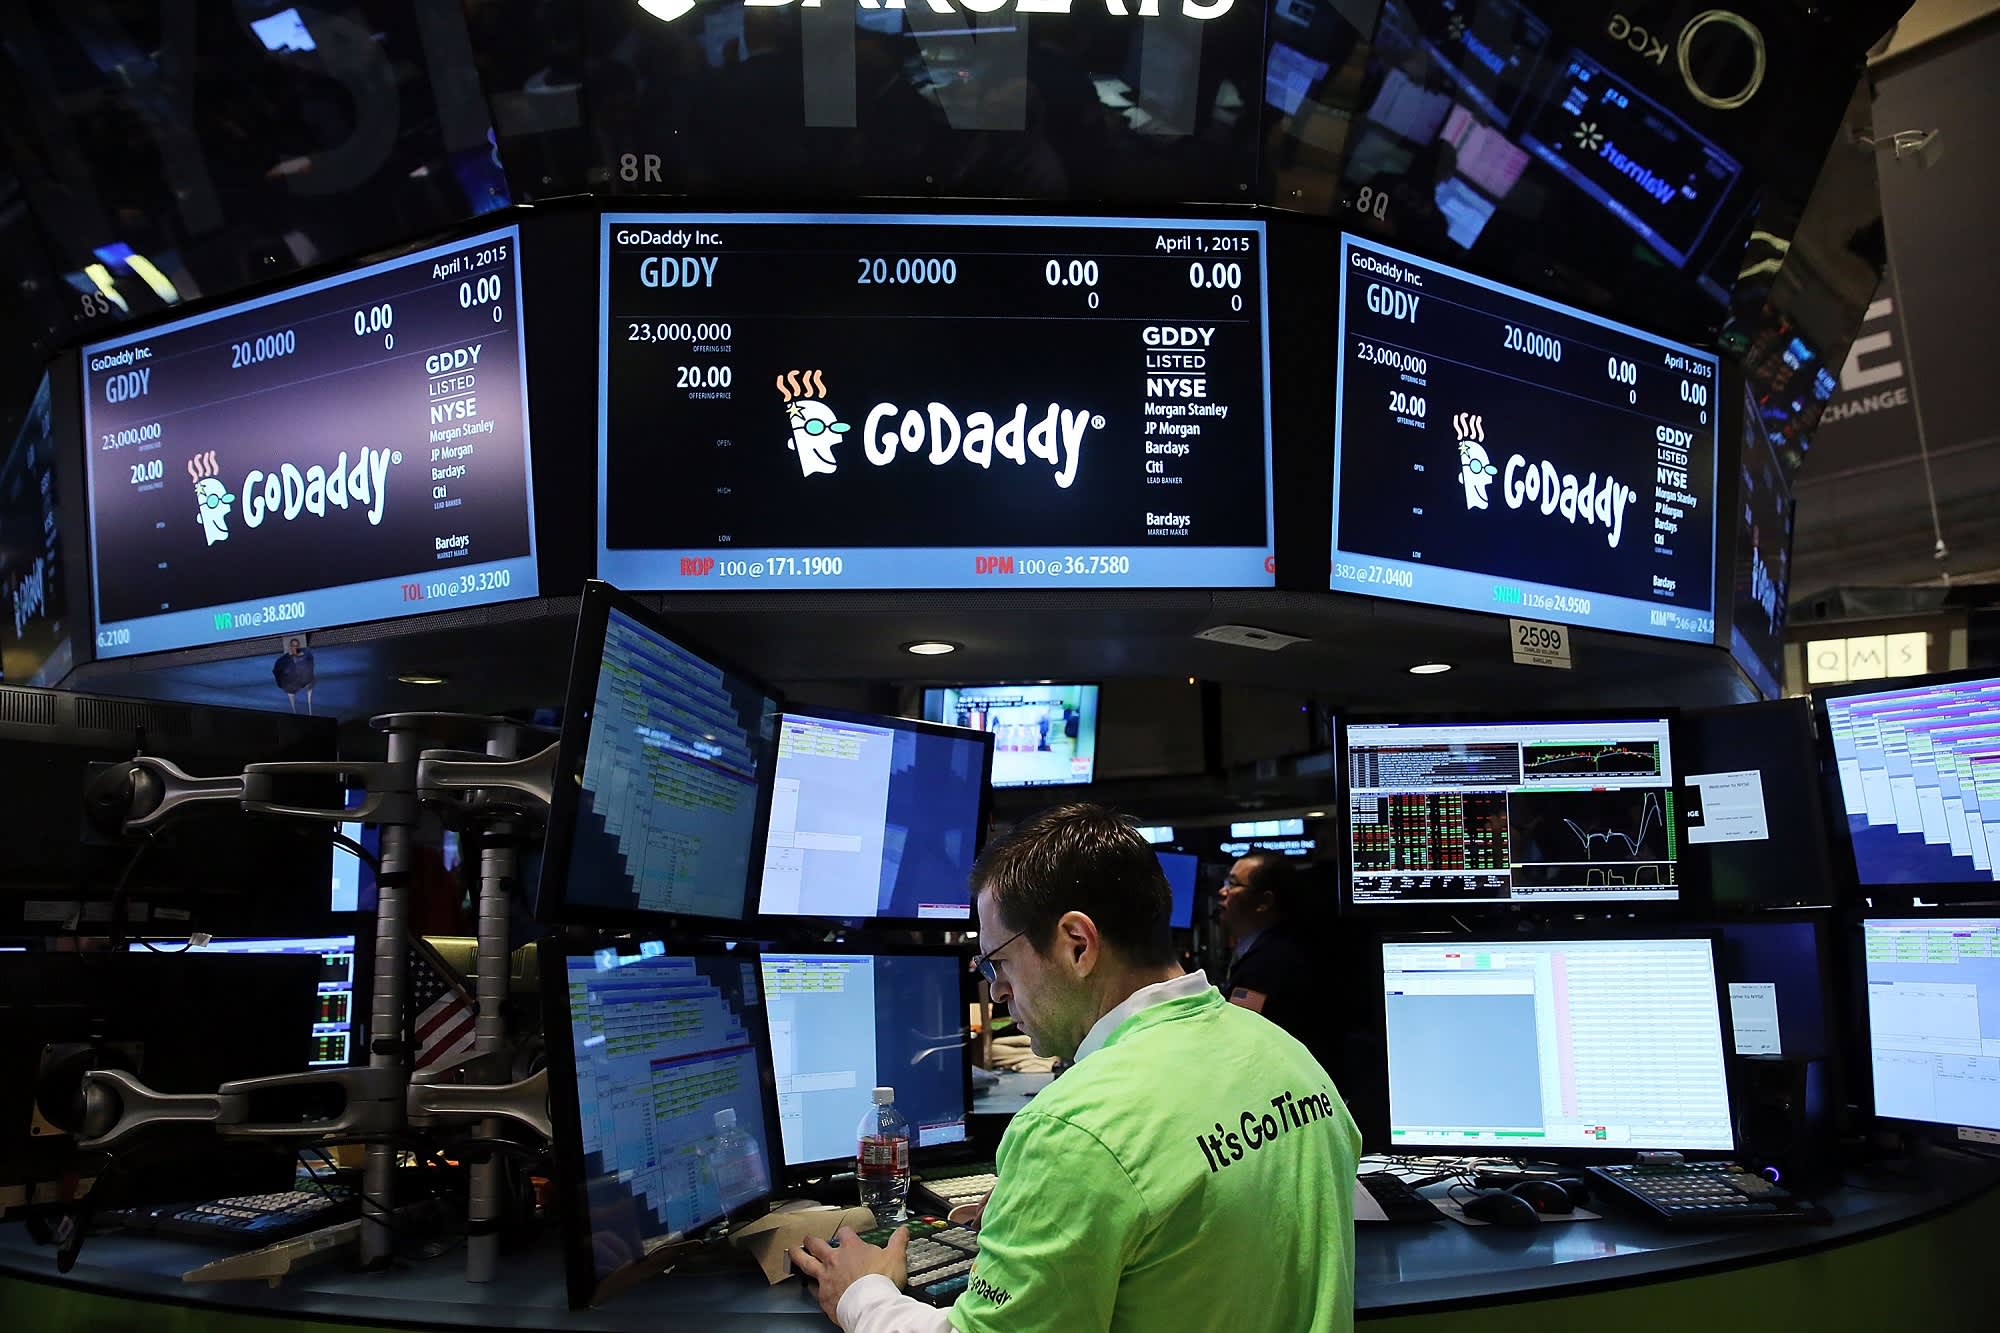 Stocks making the biggest moves premarket: GoDaddy, Apple, Cigna and others